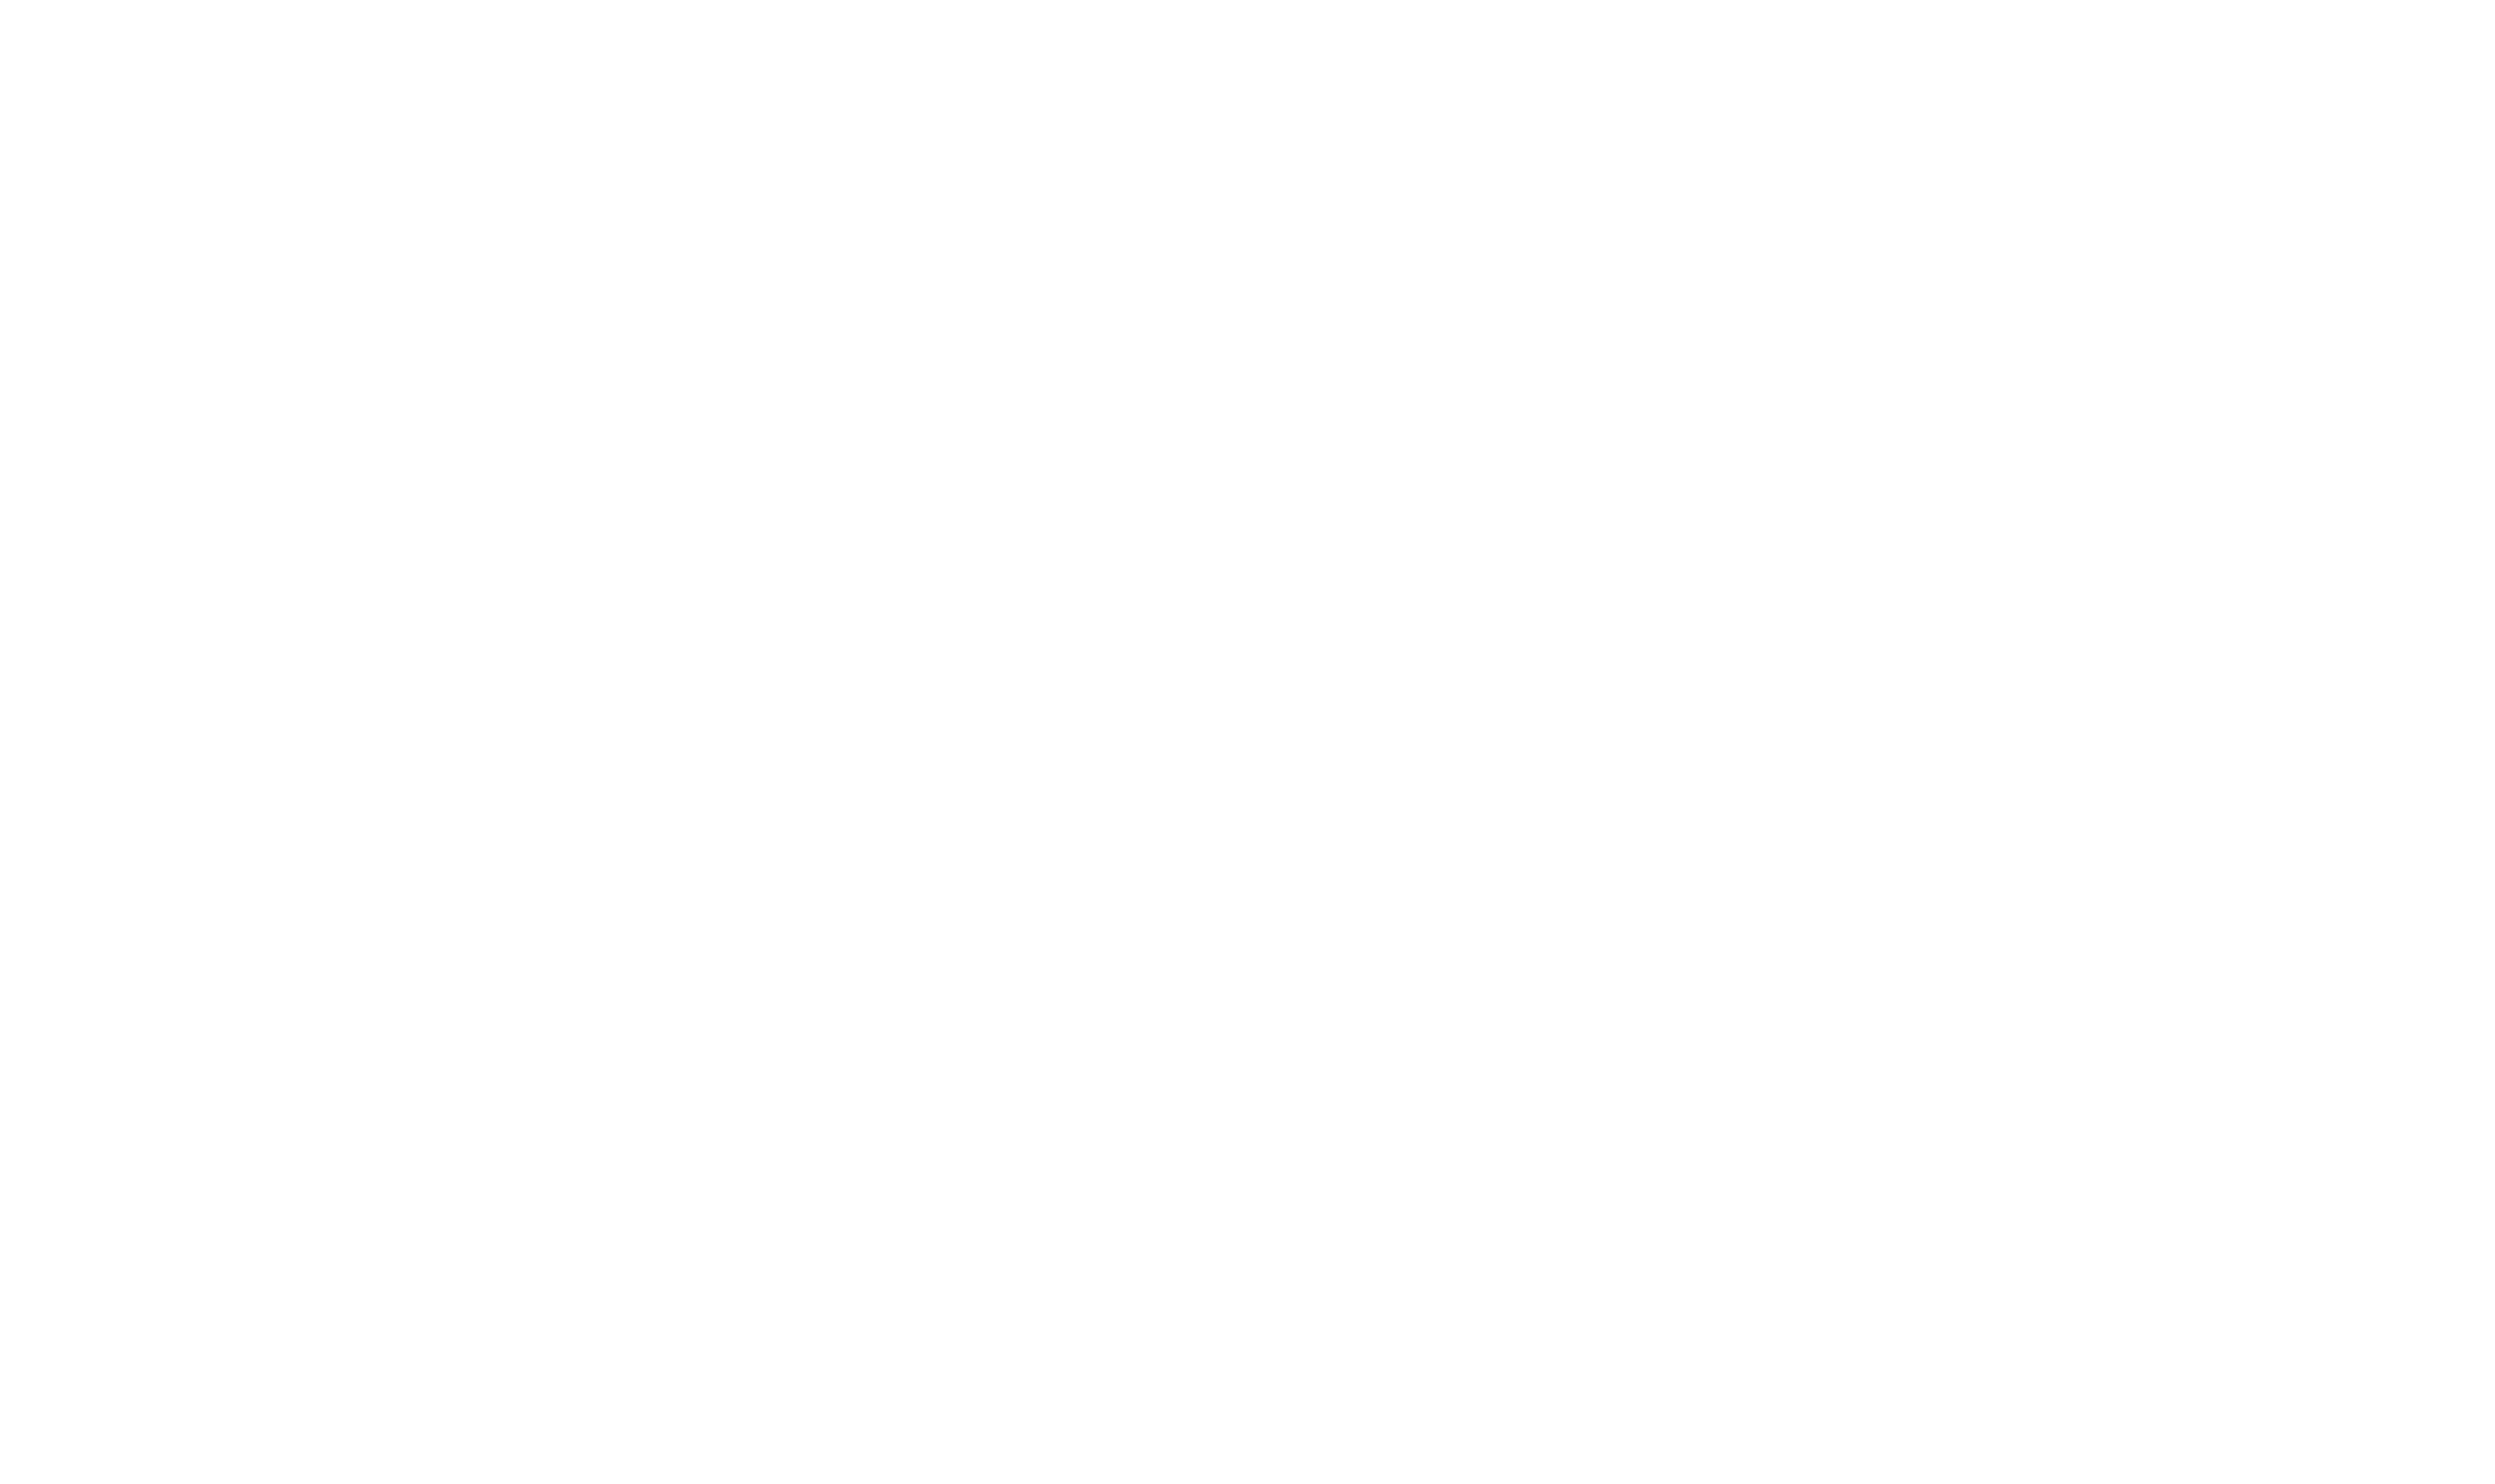 RUSSIAN_white logo RGC BEVERAGES